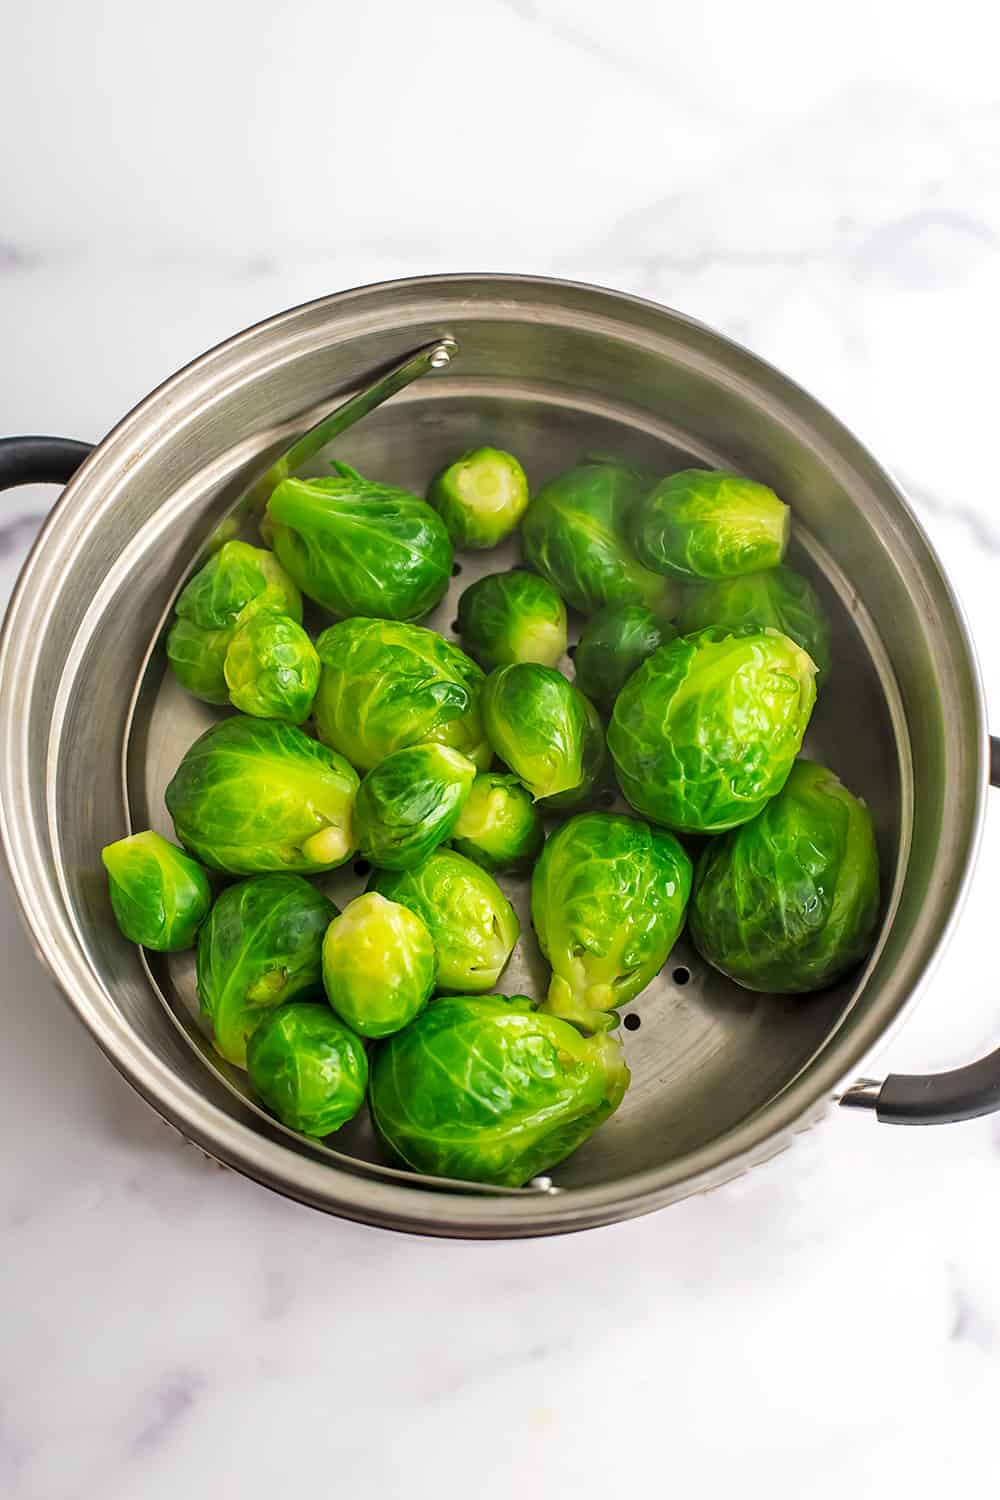 Brussel sprouts in steamer basket after steaming.